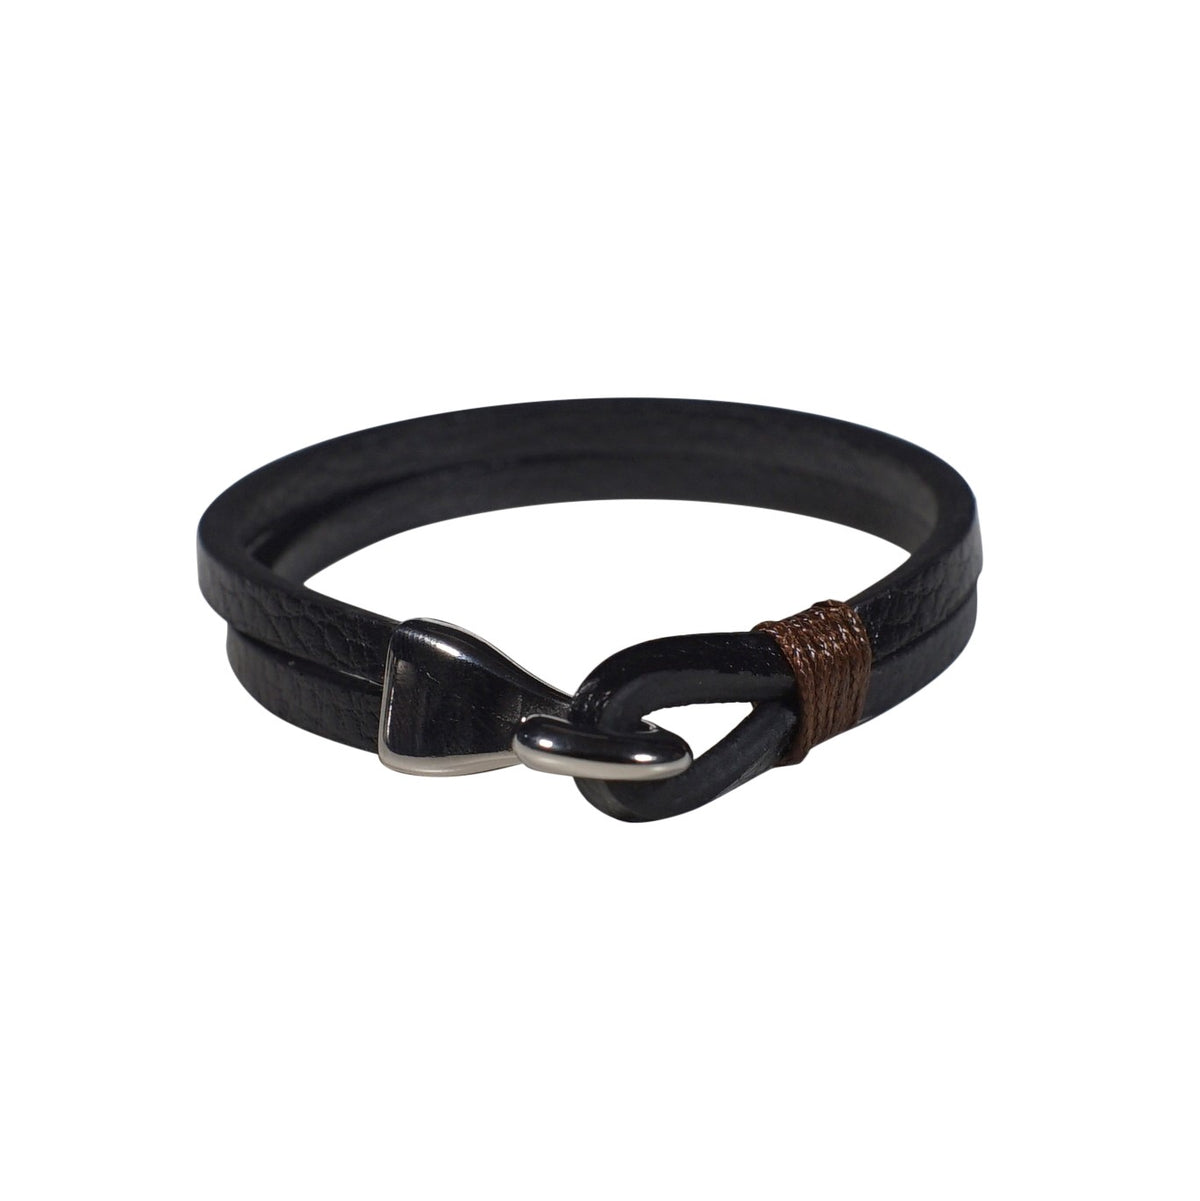 Lincoln Leather Bracelet in Black (Size L) - Nomad Watch Works Malaysia